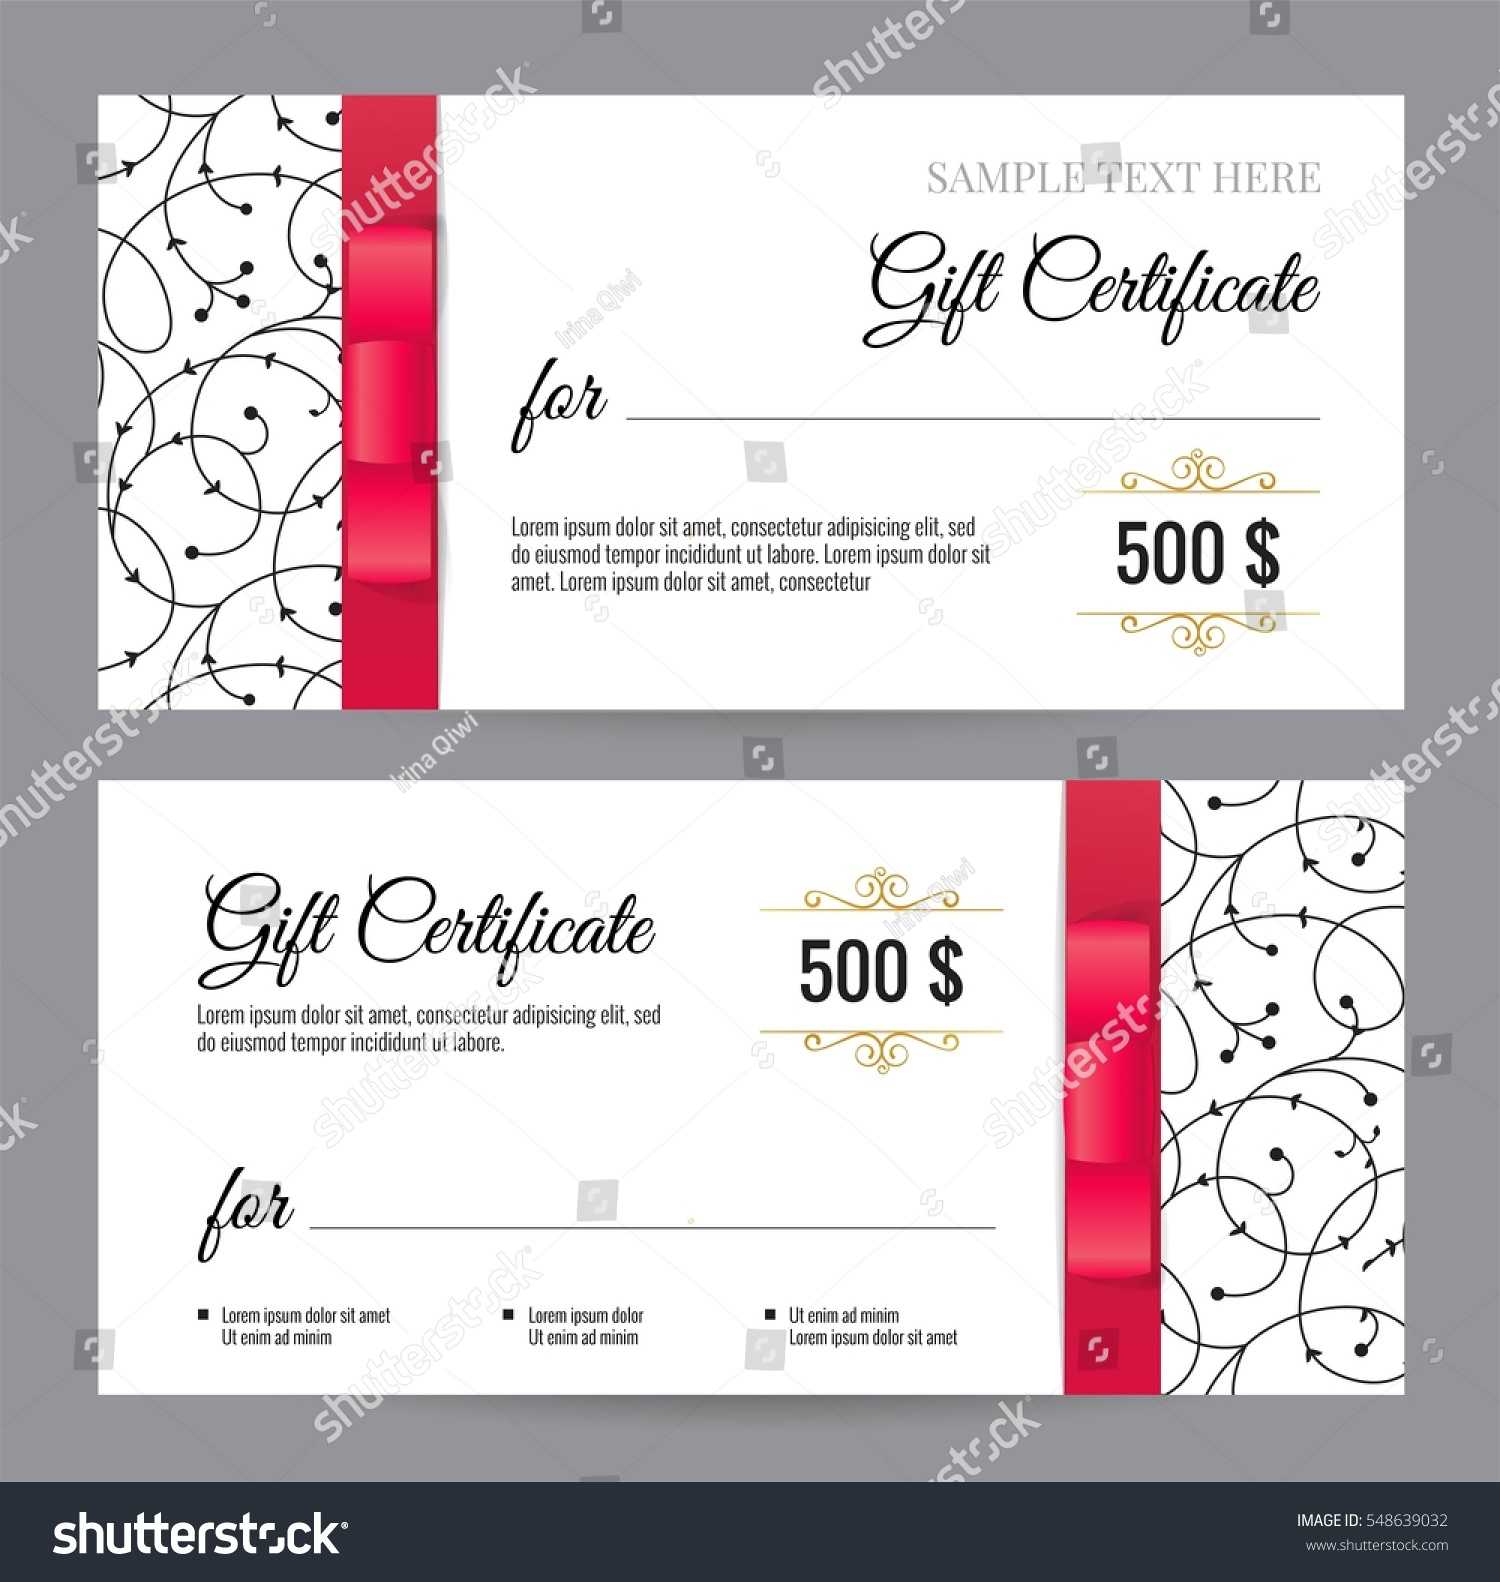 Black White Gift Voucher Template Floral Stock Vector Throughout Black And White Gift Certificate Template Free